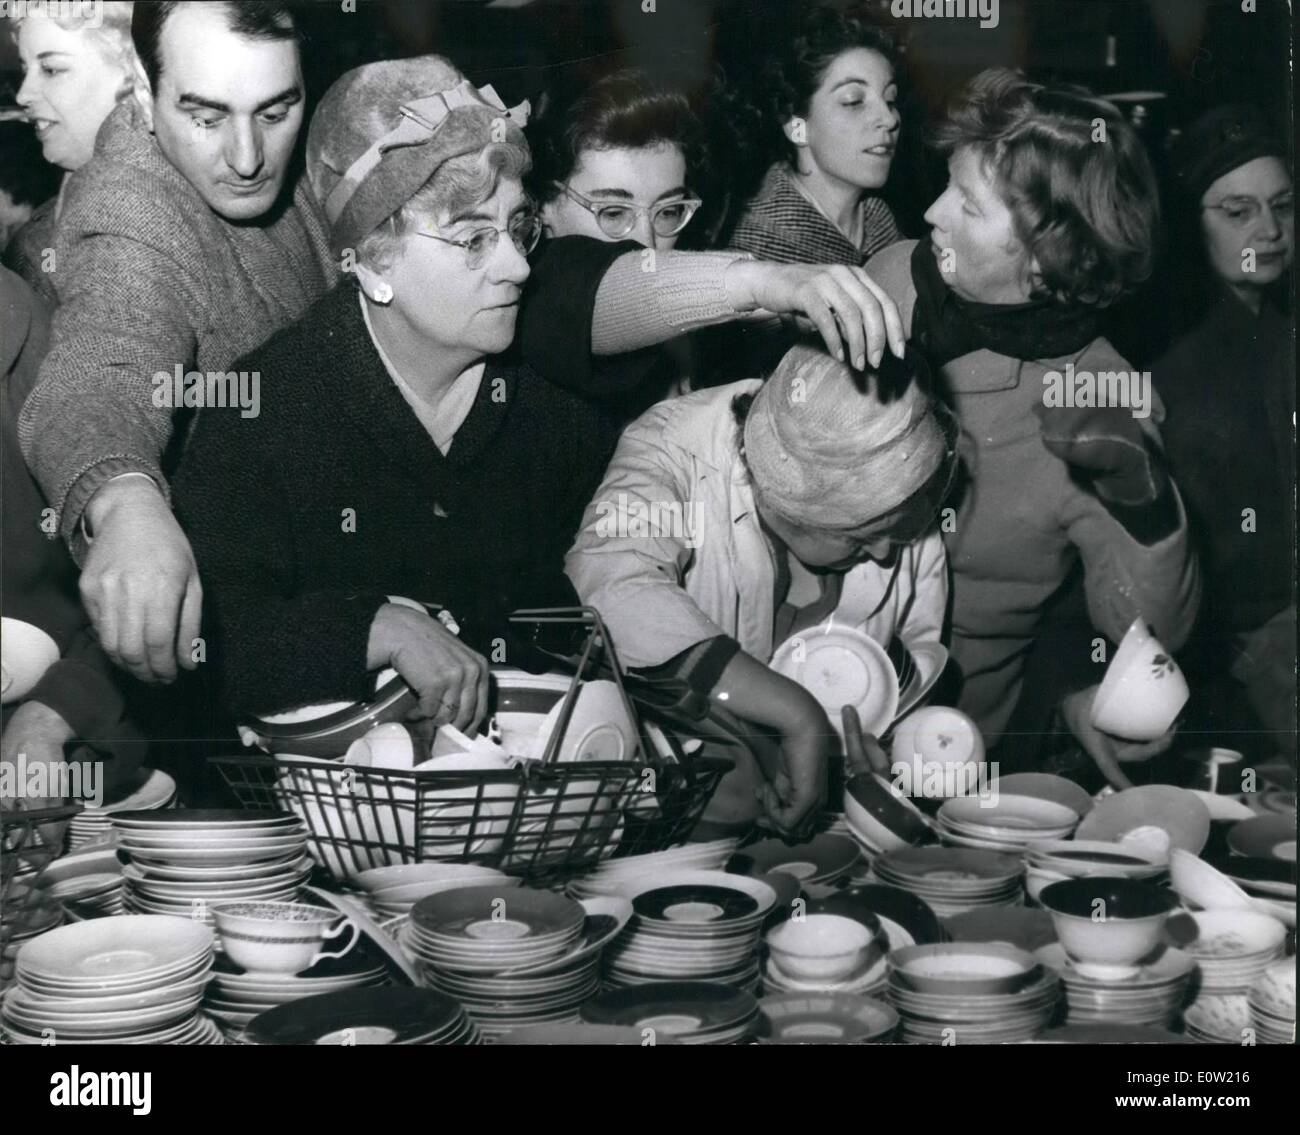 Dec. 12, 1960 - Winter sales begin at self ridges store in Oxford street. Photo shows women struggle between themselves to reach for some of the bargains at the crockery counter during the sale today. Stock Photo